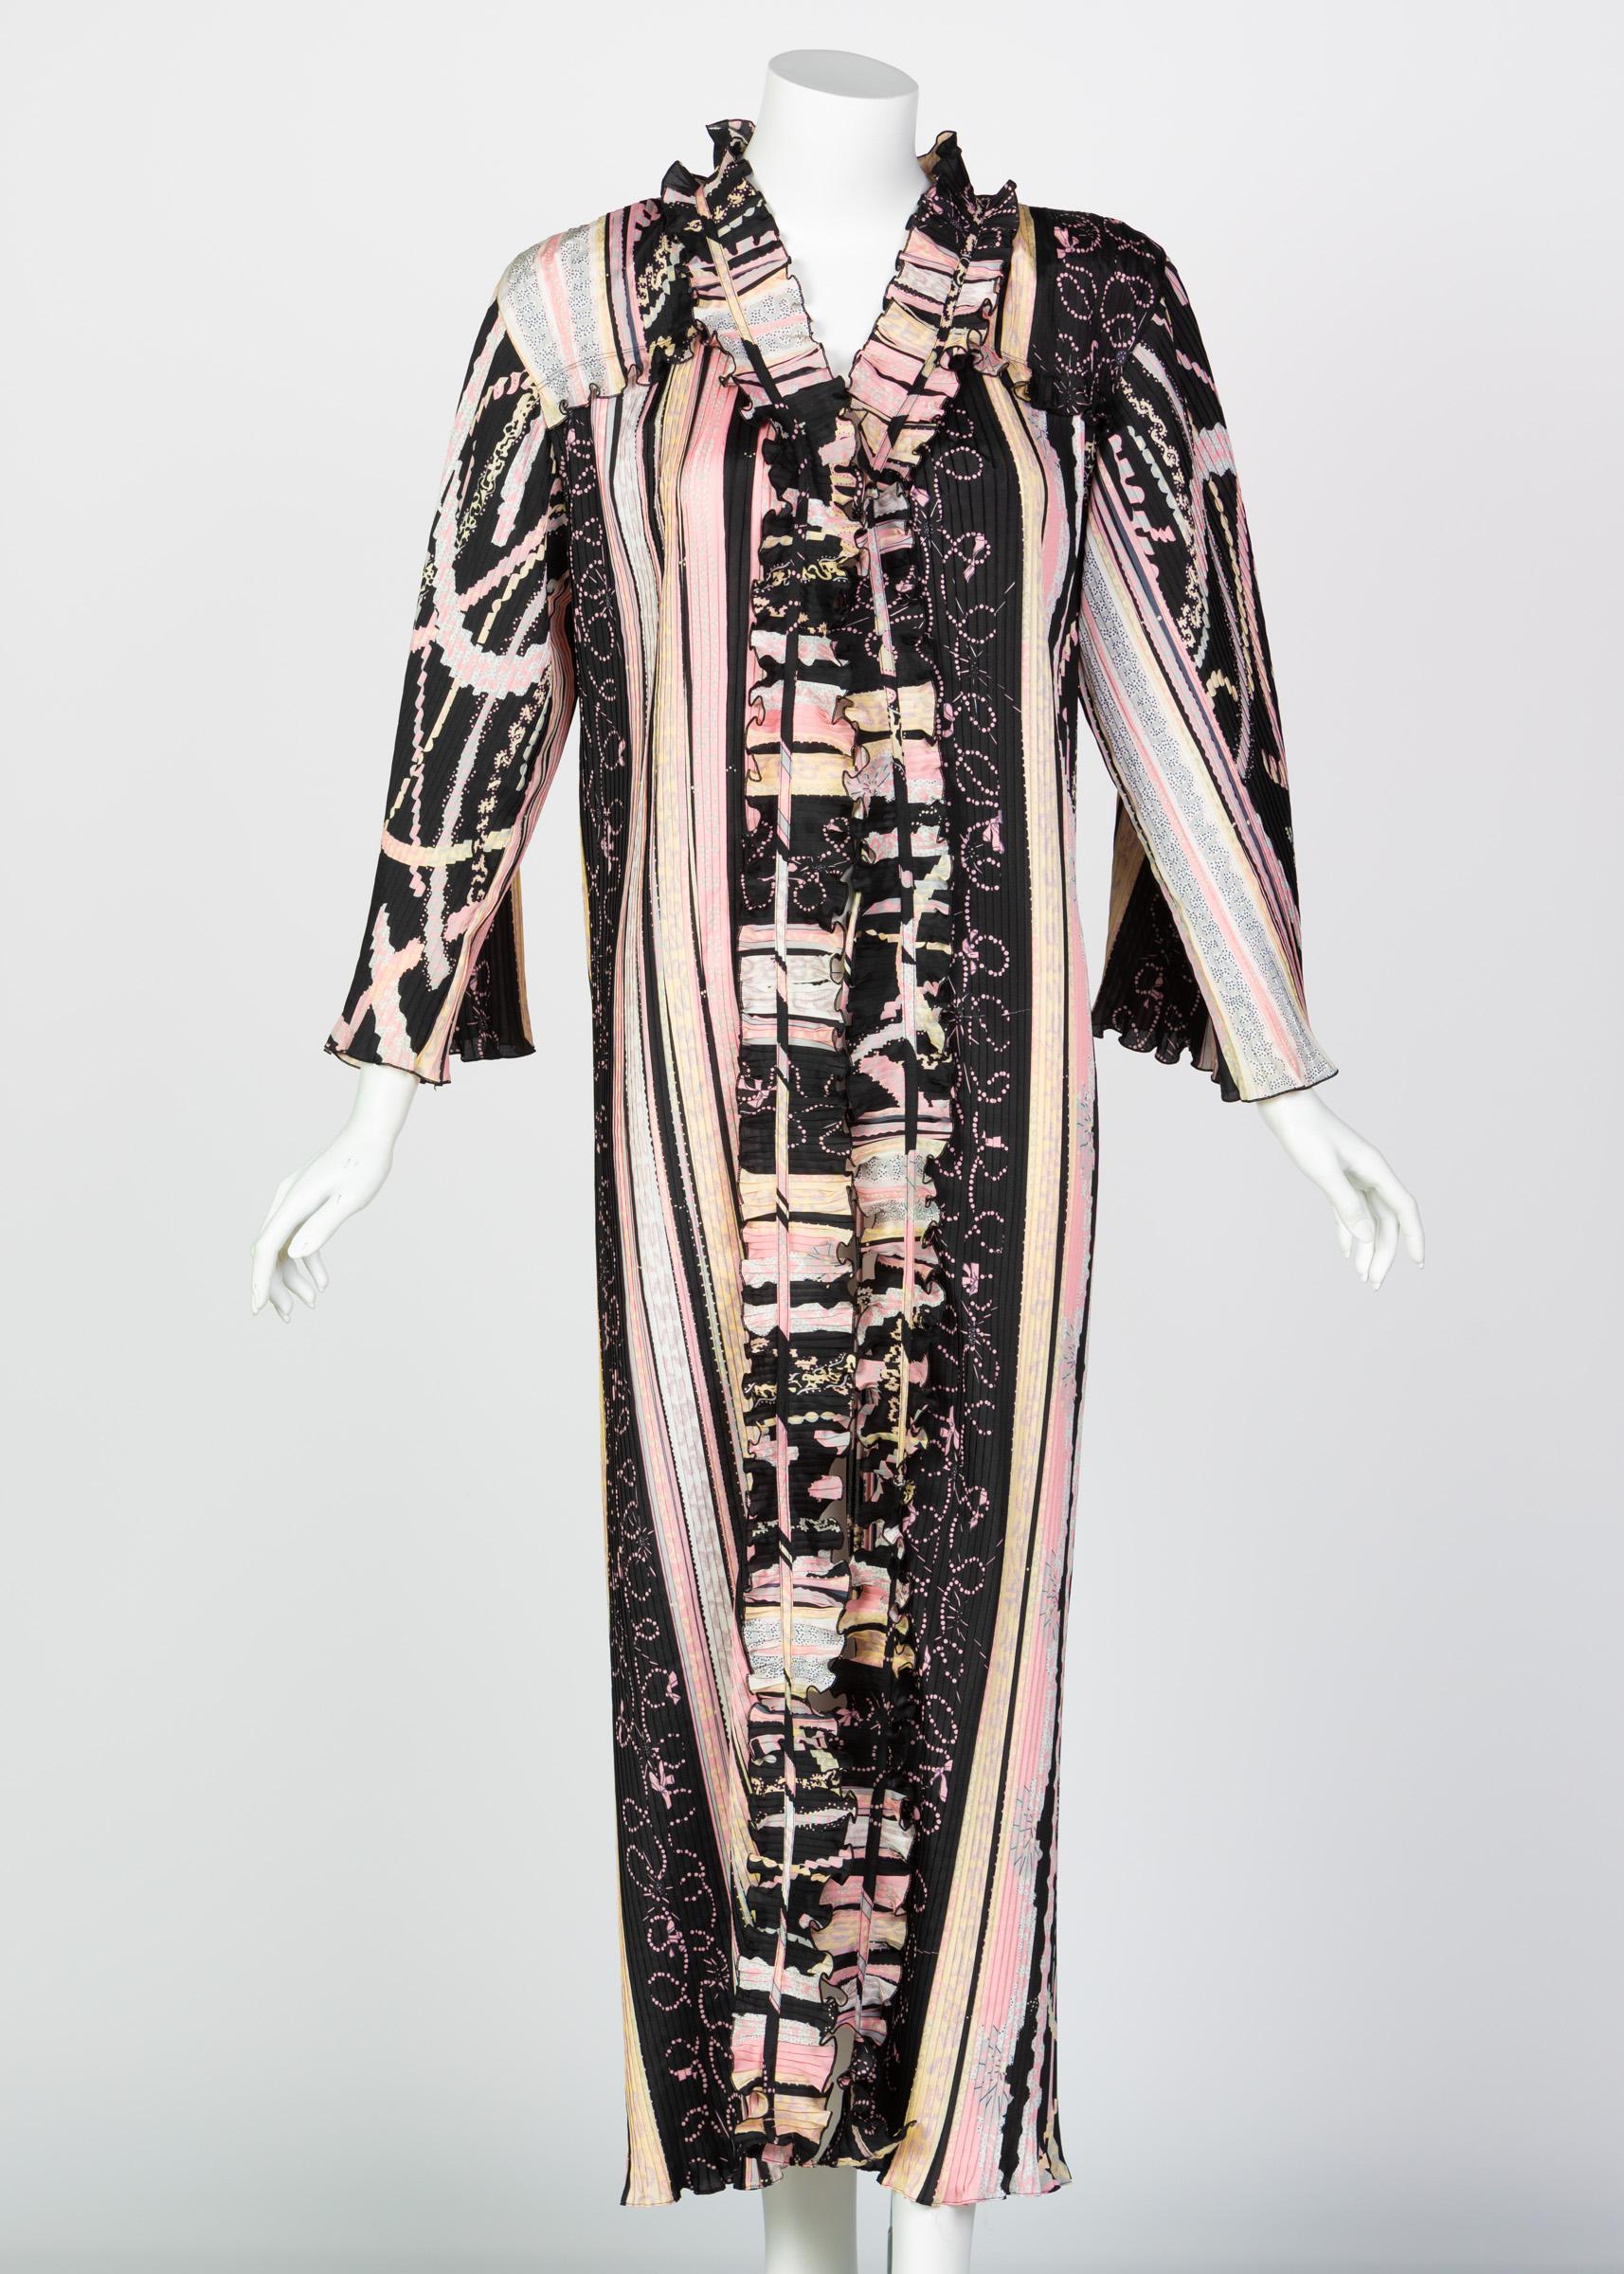 Zandra Rhodes is one of the original queens of eccentric. Her bold silhouettes and even bolder colors marked a fashion revolution in the 70s through the 80s that is being reembraced today. With several museum shows paying homage to Rhodes’ work, her